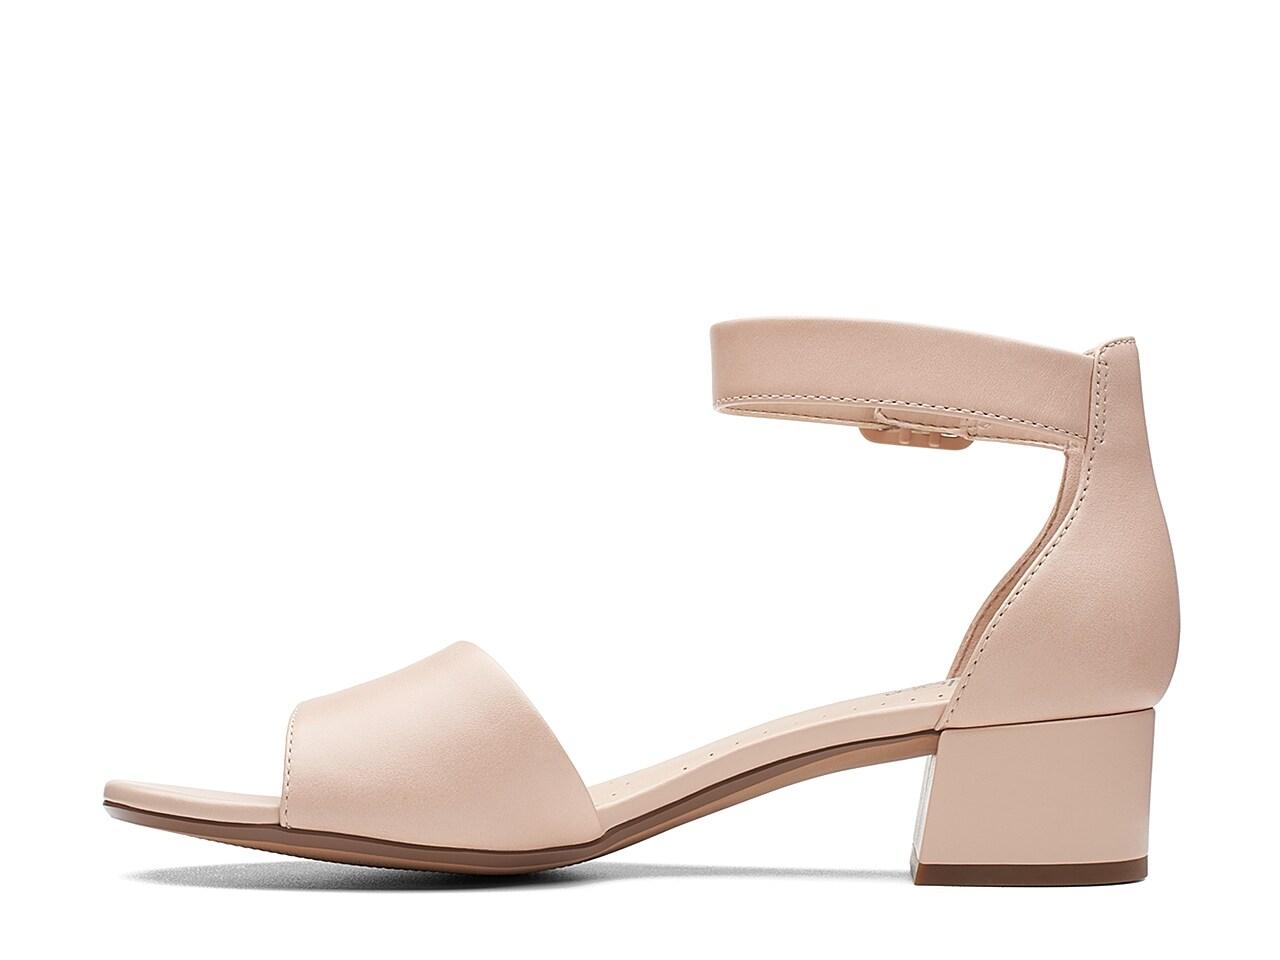 Clarks Deva Mae Leather Block Heeled Sandals in Nude (Natural) - Save ...